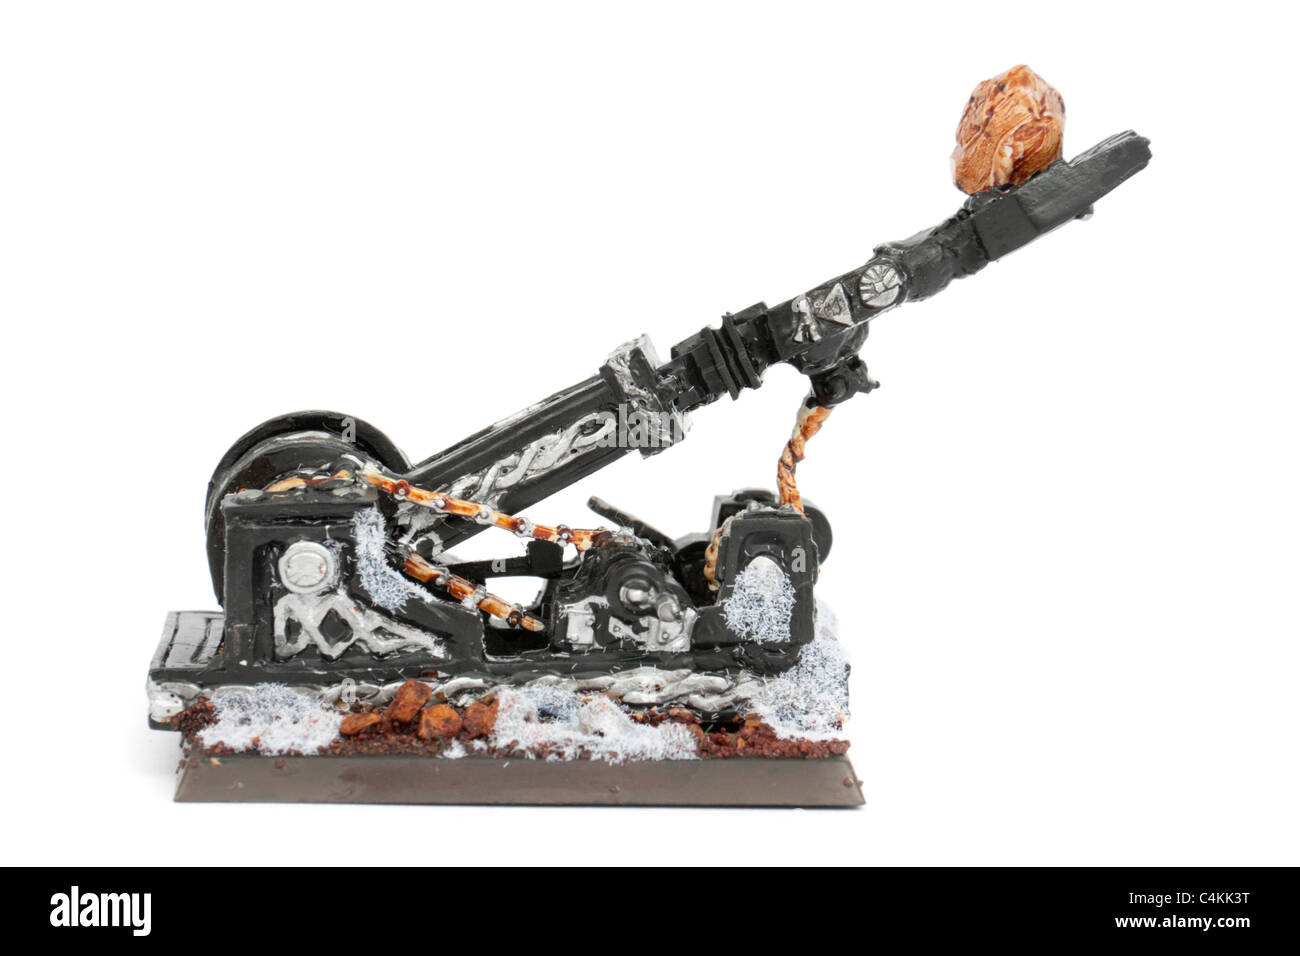 Games Workshop 'Warhammer' fantasy role play catapult Stock Photo